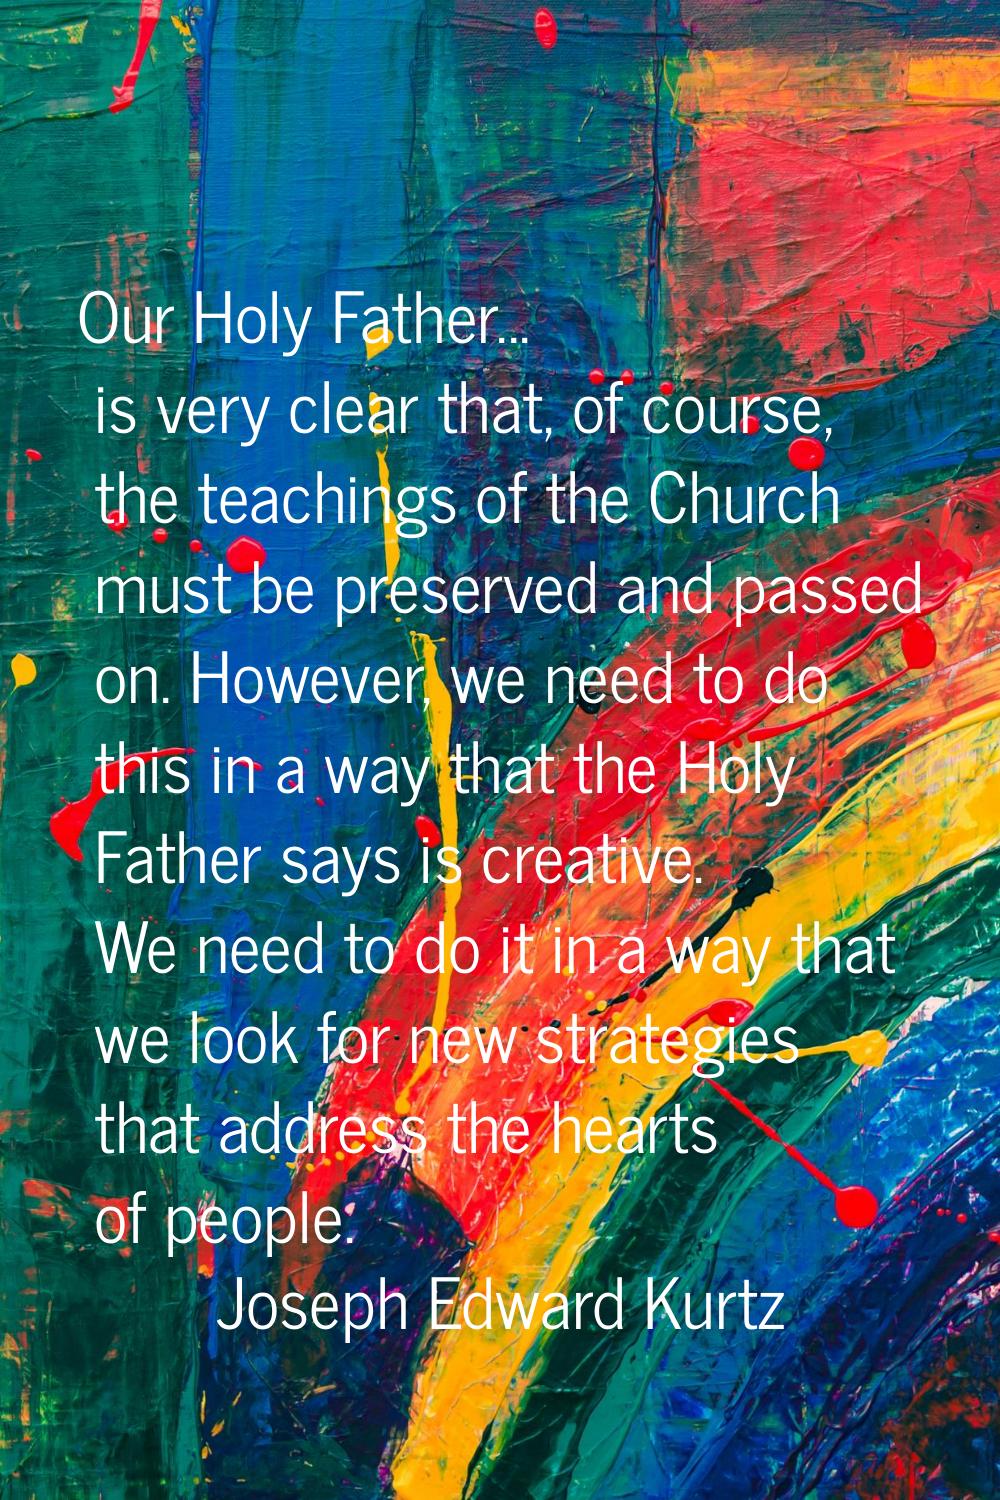 Our Holy Father... is very clear that, of course, the teachings of the Church must be preserved and